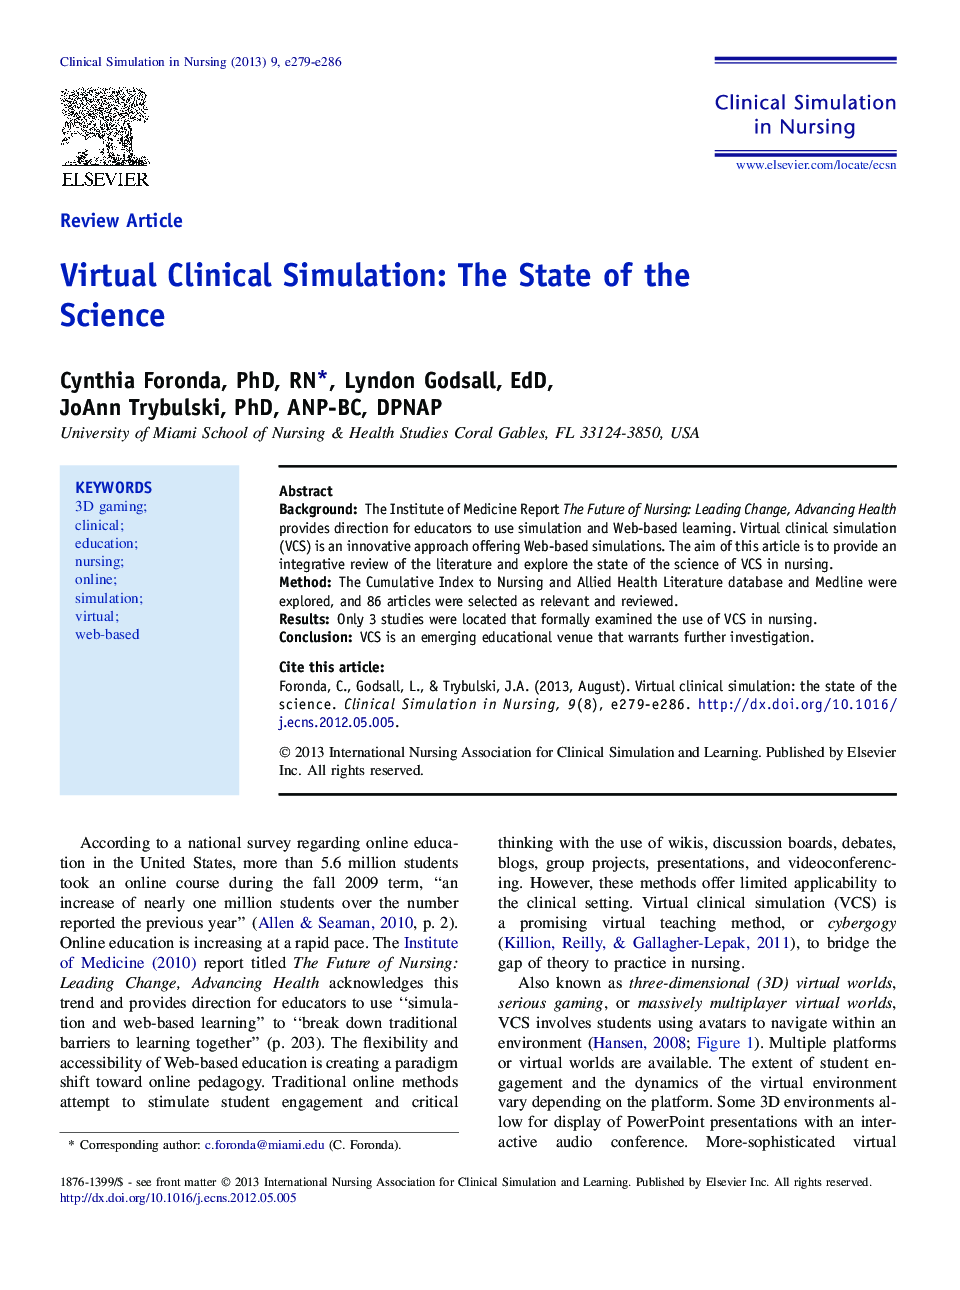 Virtual Clinical Simulation: The State of the Science